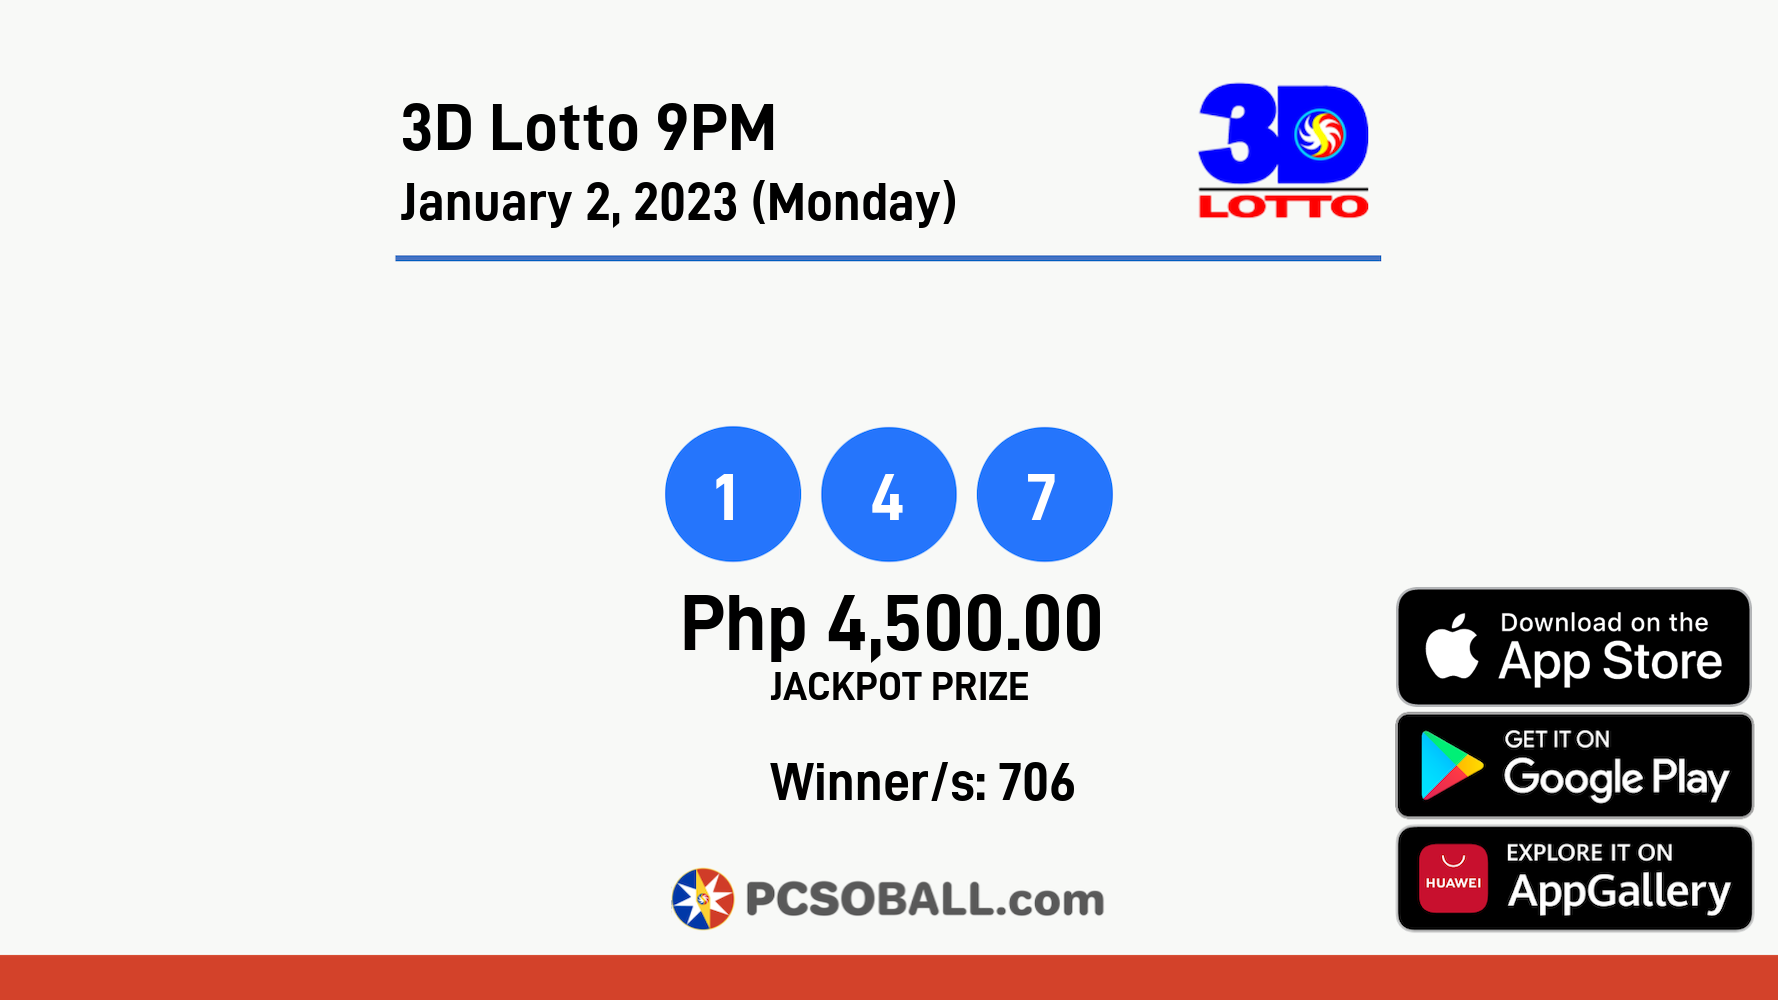 3D Lotto 9PM January 2, 2023 (Monday) Result